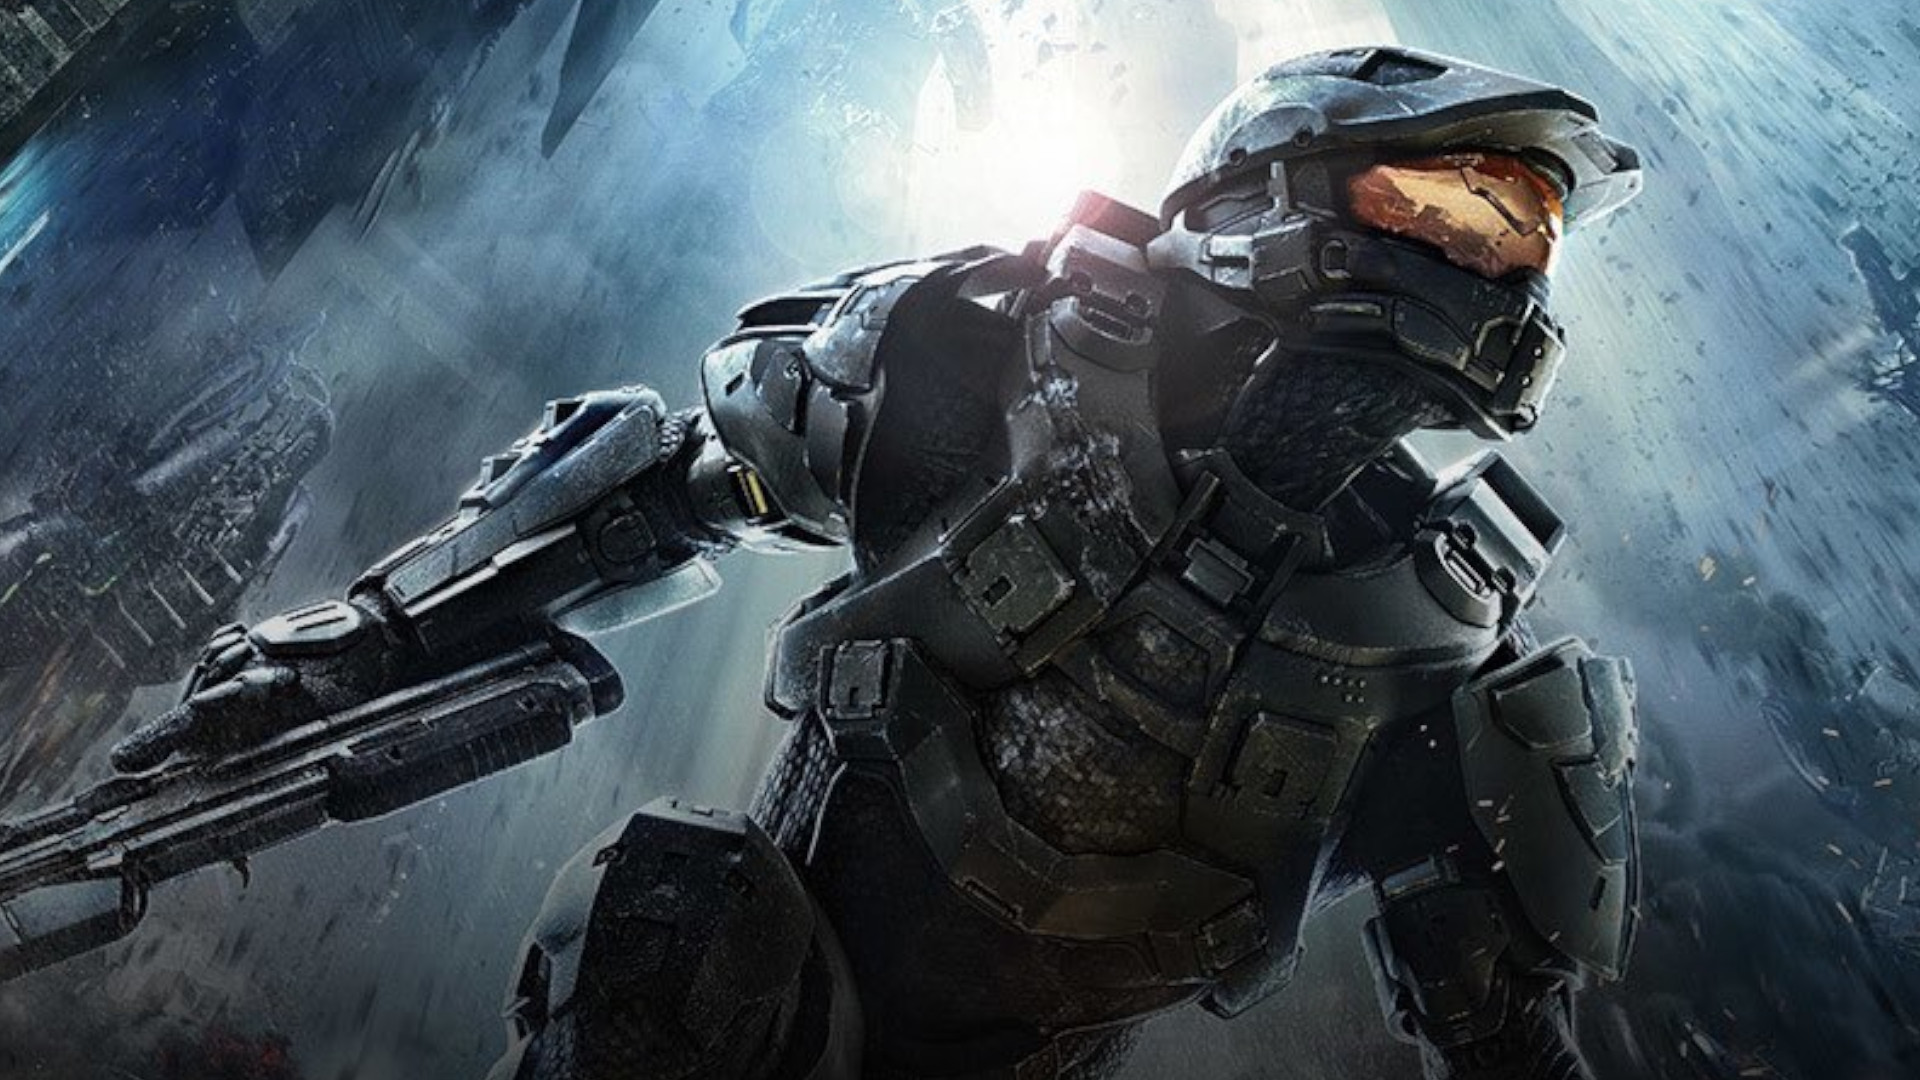 Halo: The Master Chief Collection gets Halo 4's Spartan Ops